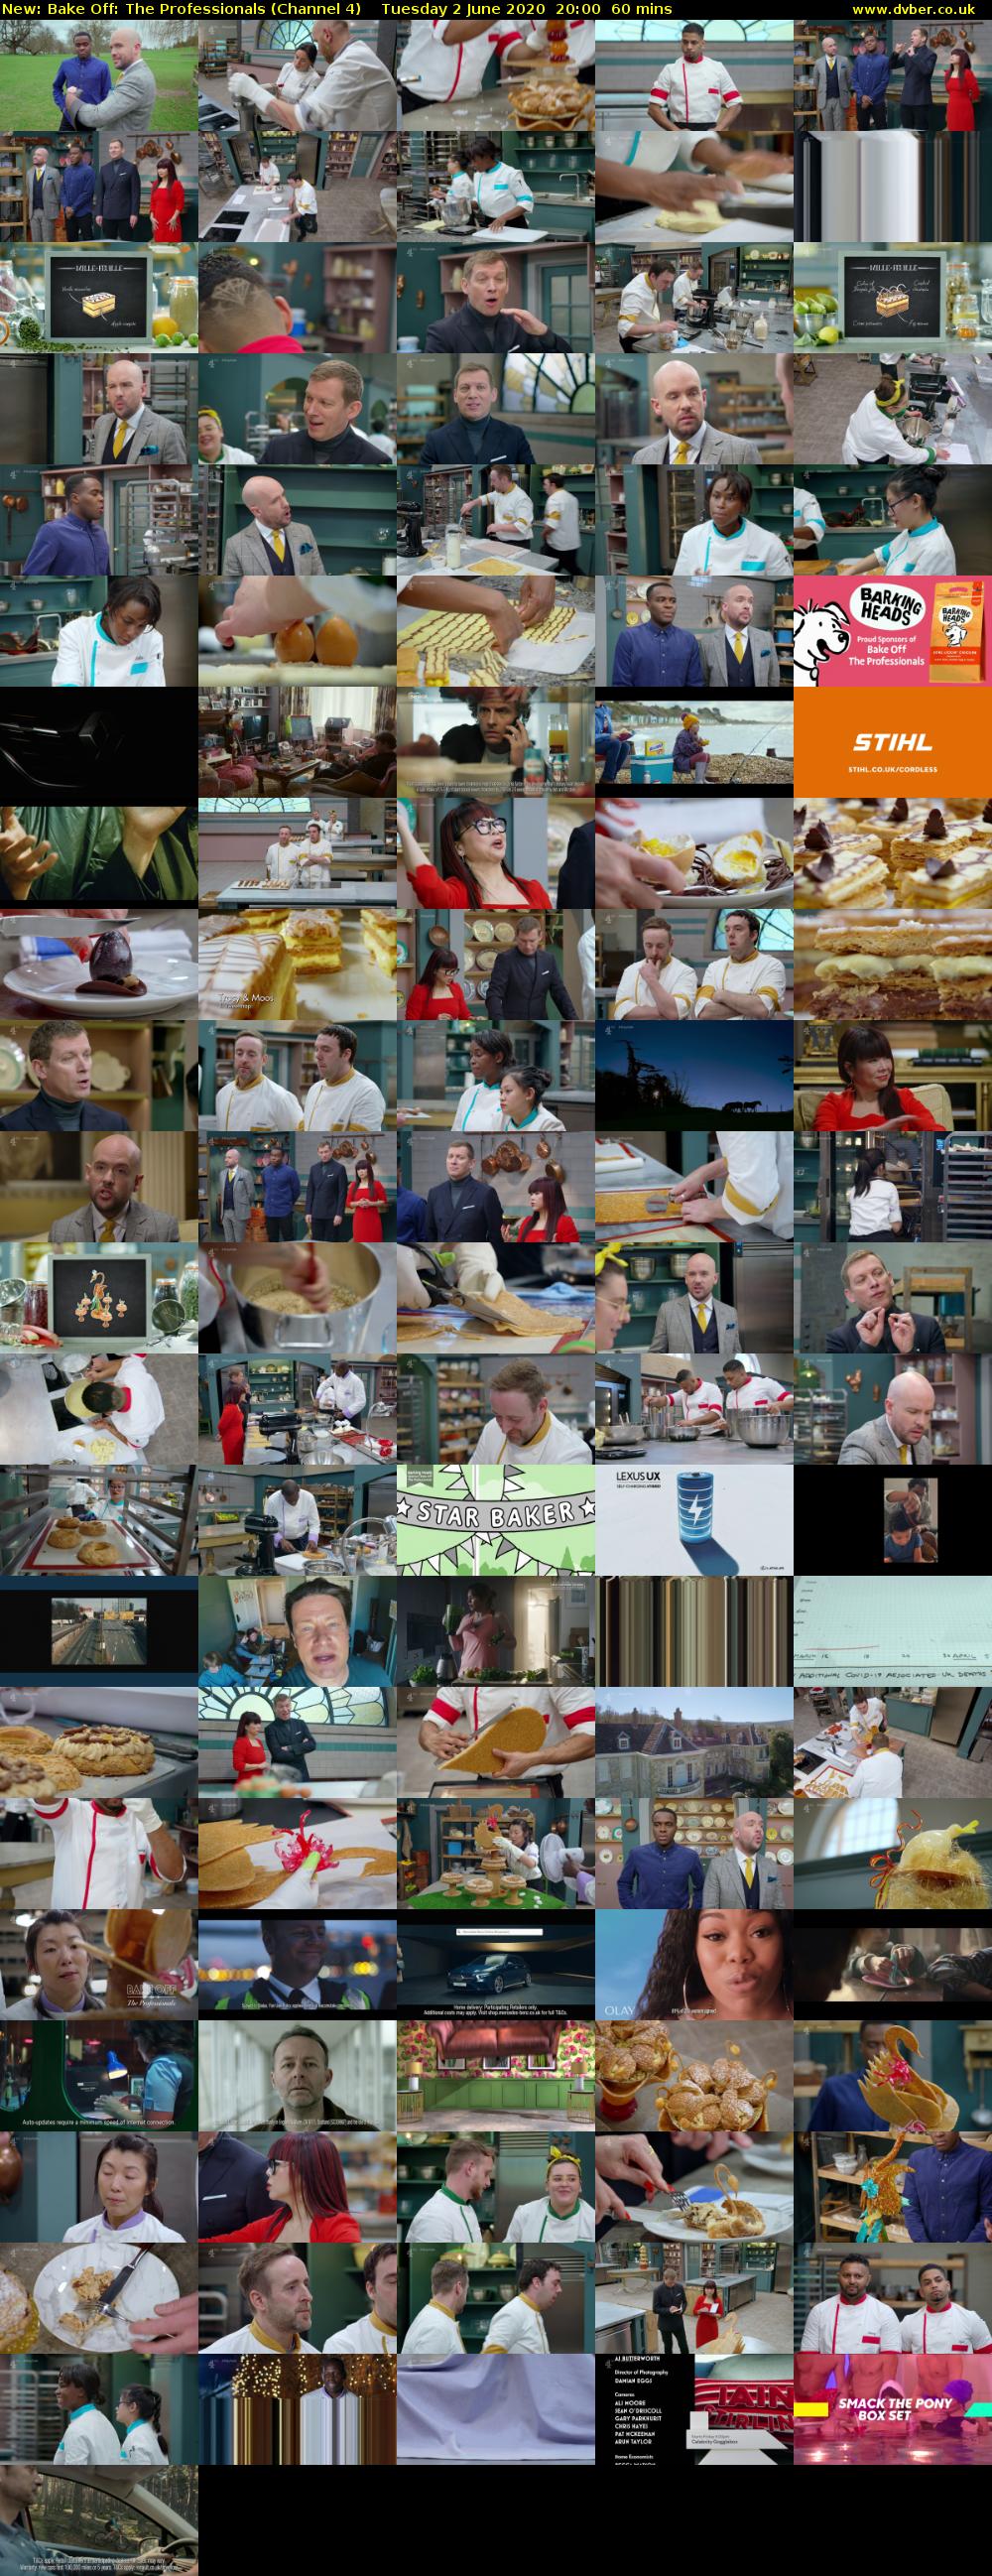 Bake Off: The Professionals (Channel 4) Tuesday 2 June 2020 20:00 - 21:00